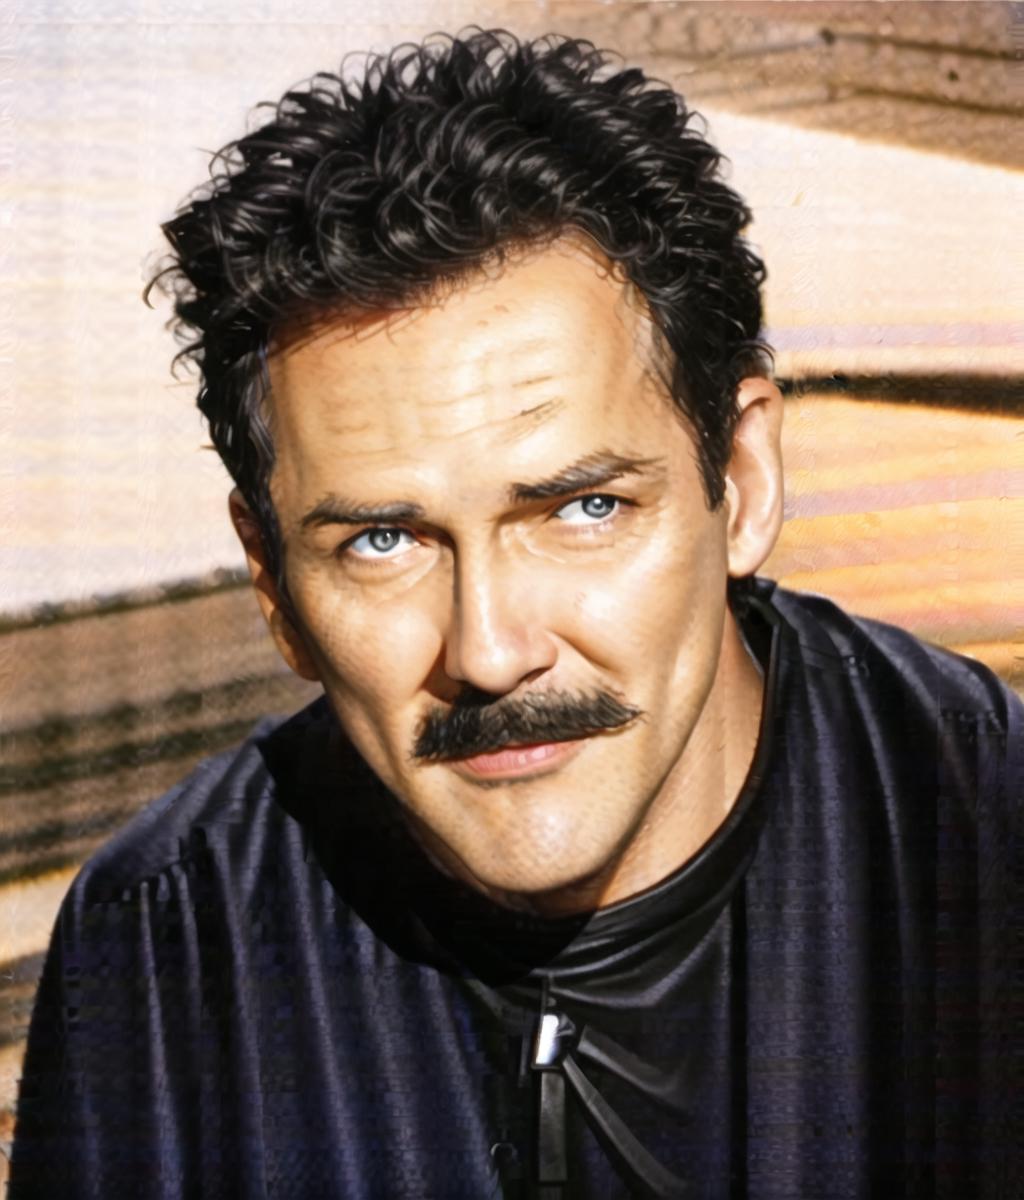 Norm Macdonald image by interfusor